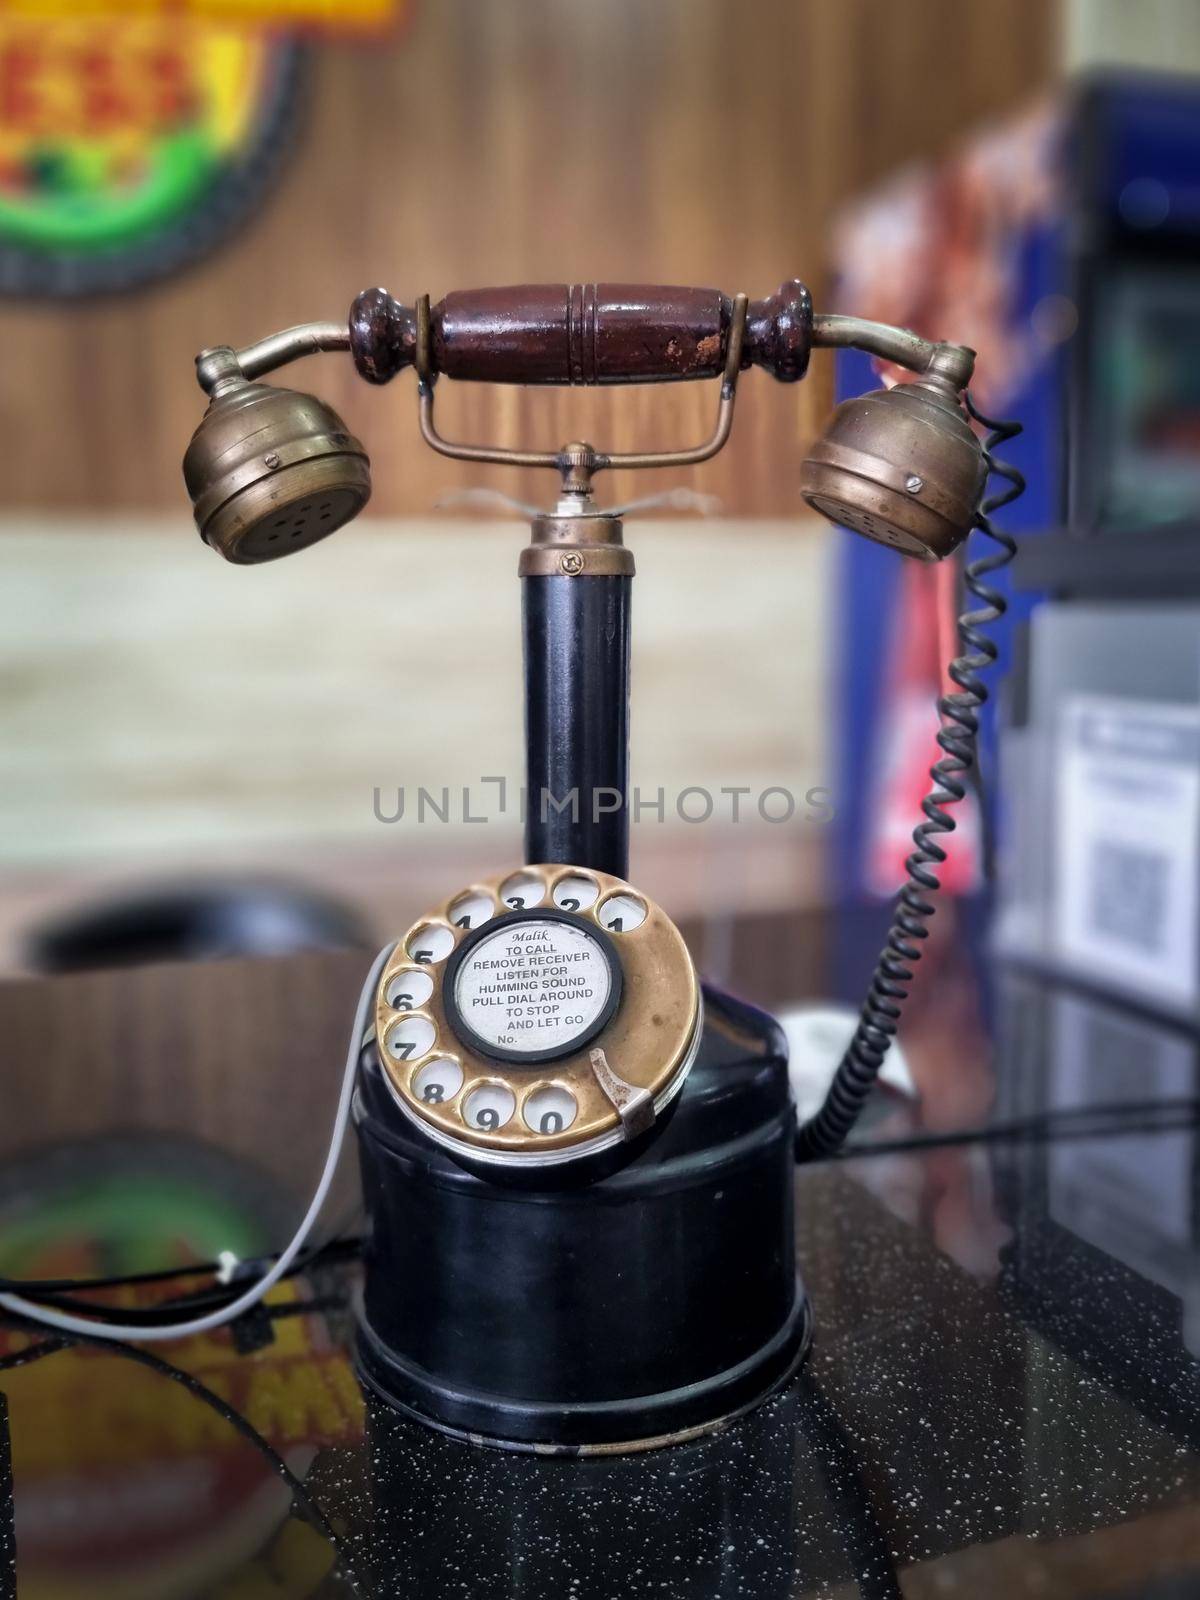 vintage antique phone with long neck to hold receiver and rotary dial placed at an office restaurant counter in India showing the technology of the past